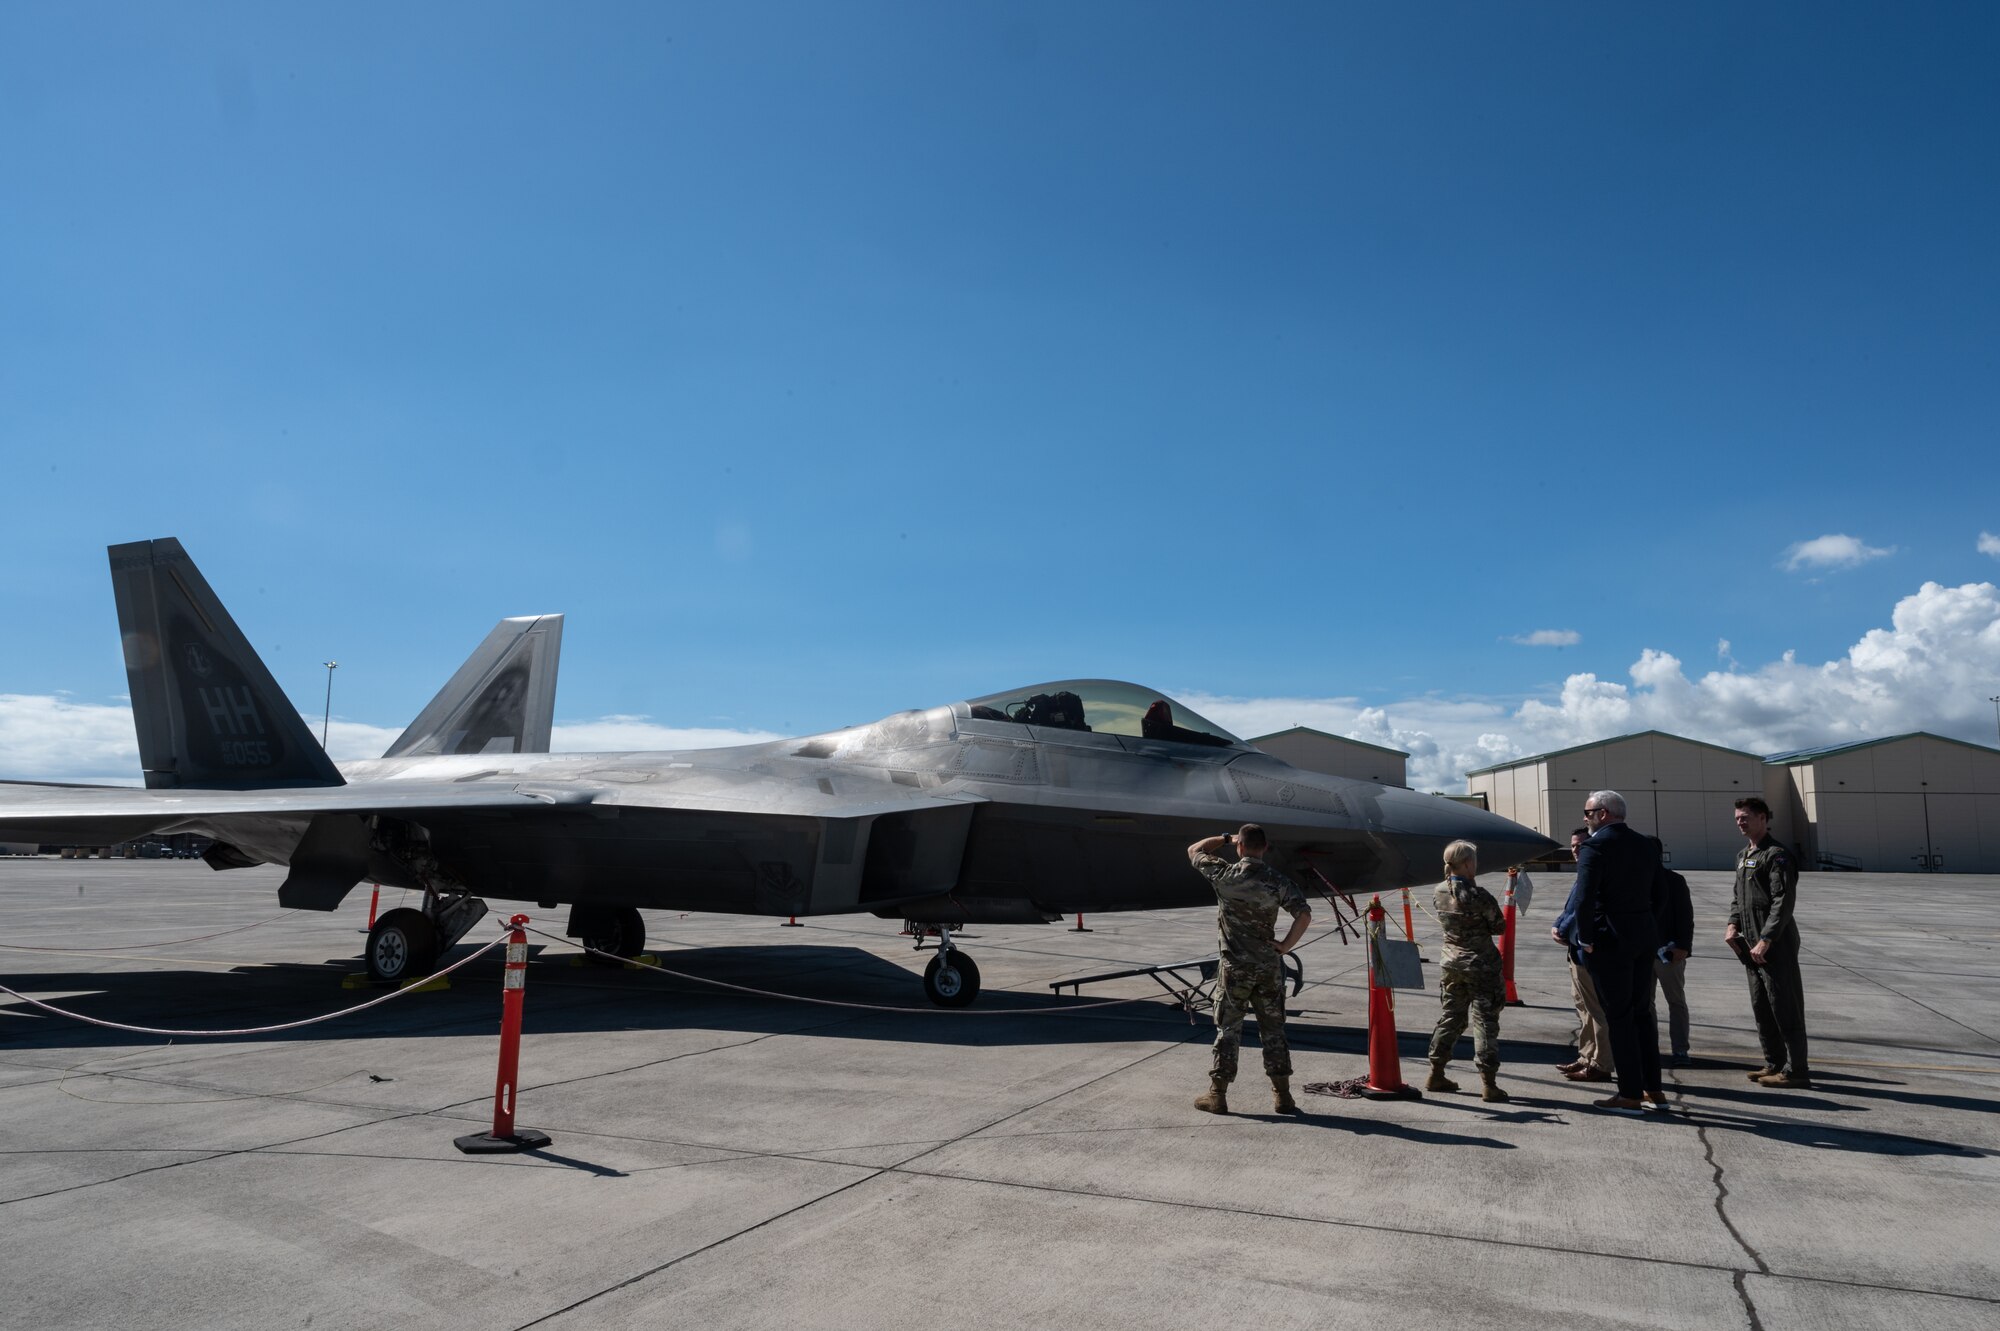 Staff delegation members tour a F-22 Raptor assigned to the 154th Wing at Joint Base Pearl Harbor-Hickam, Hawaii. The members were familiarized with the wing’s role and ability to enable, employ and project combat power across the Indo-Pacific. (U.S. Air Force photo by Staff Sgt. Alan Ricker)